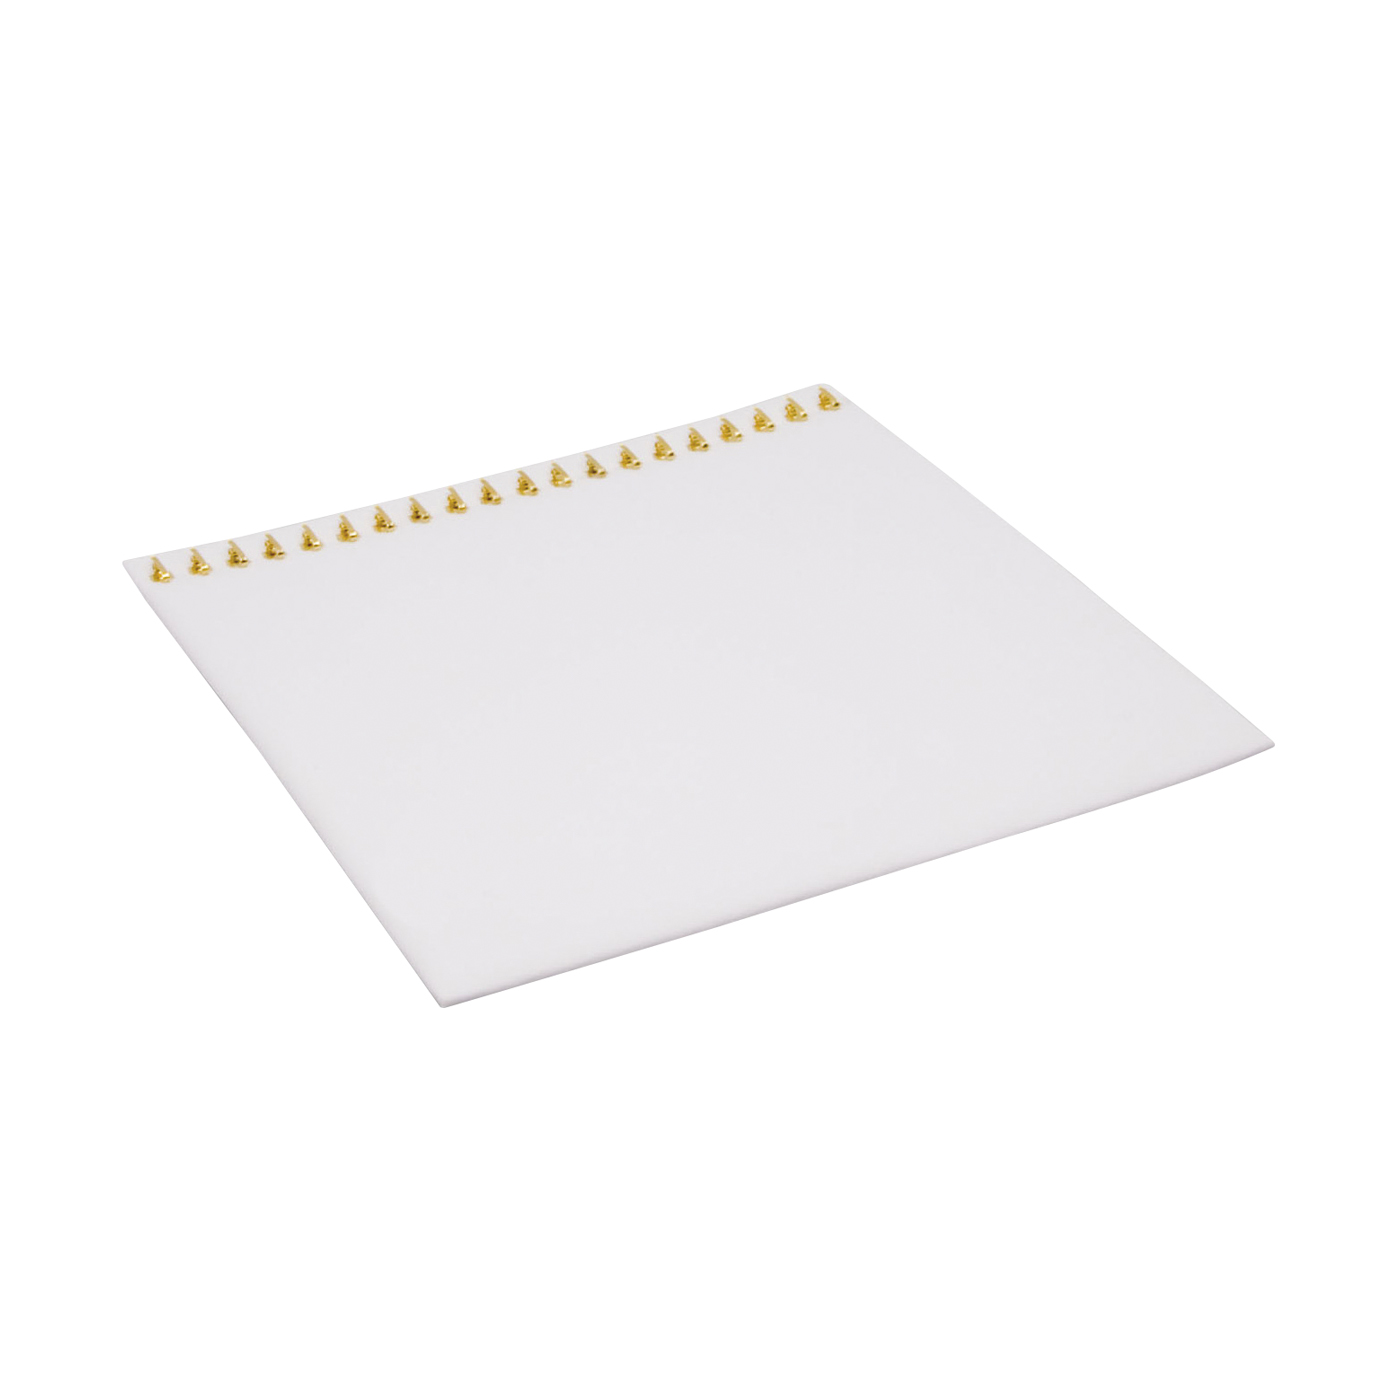 Tray System Inlay, White, with Hook Strip, 224 x 224 mm - 1 piece